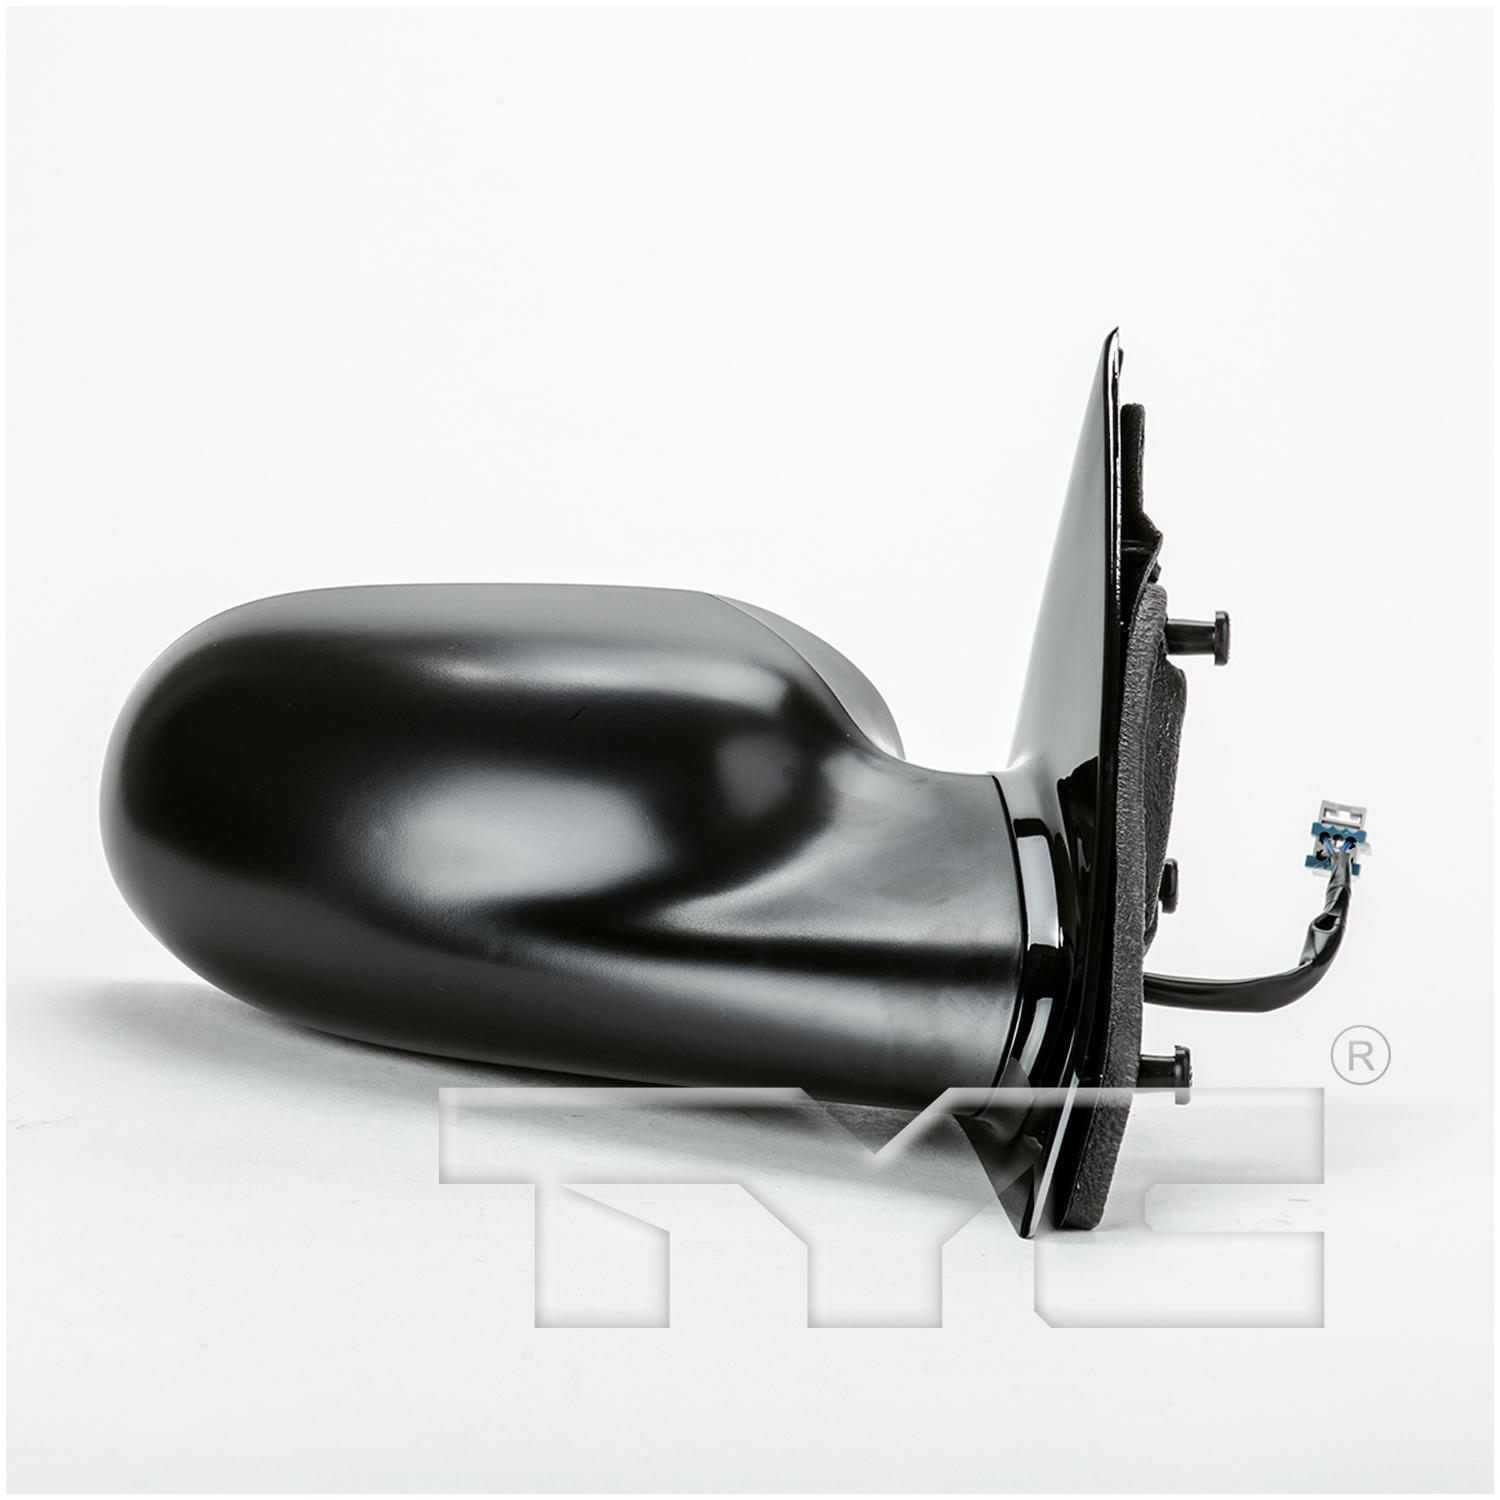 Aftermarket MIRRORS for SATURN - LS1, LS1,00-00,RT Mirror outside rear view